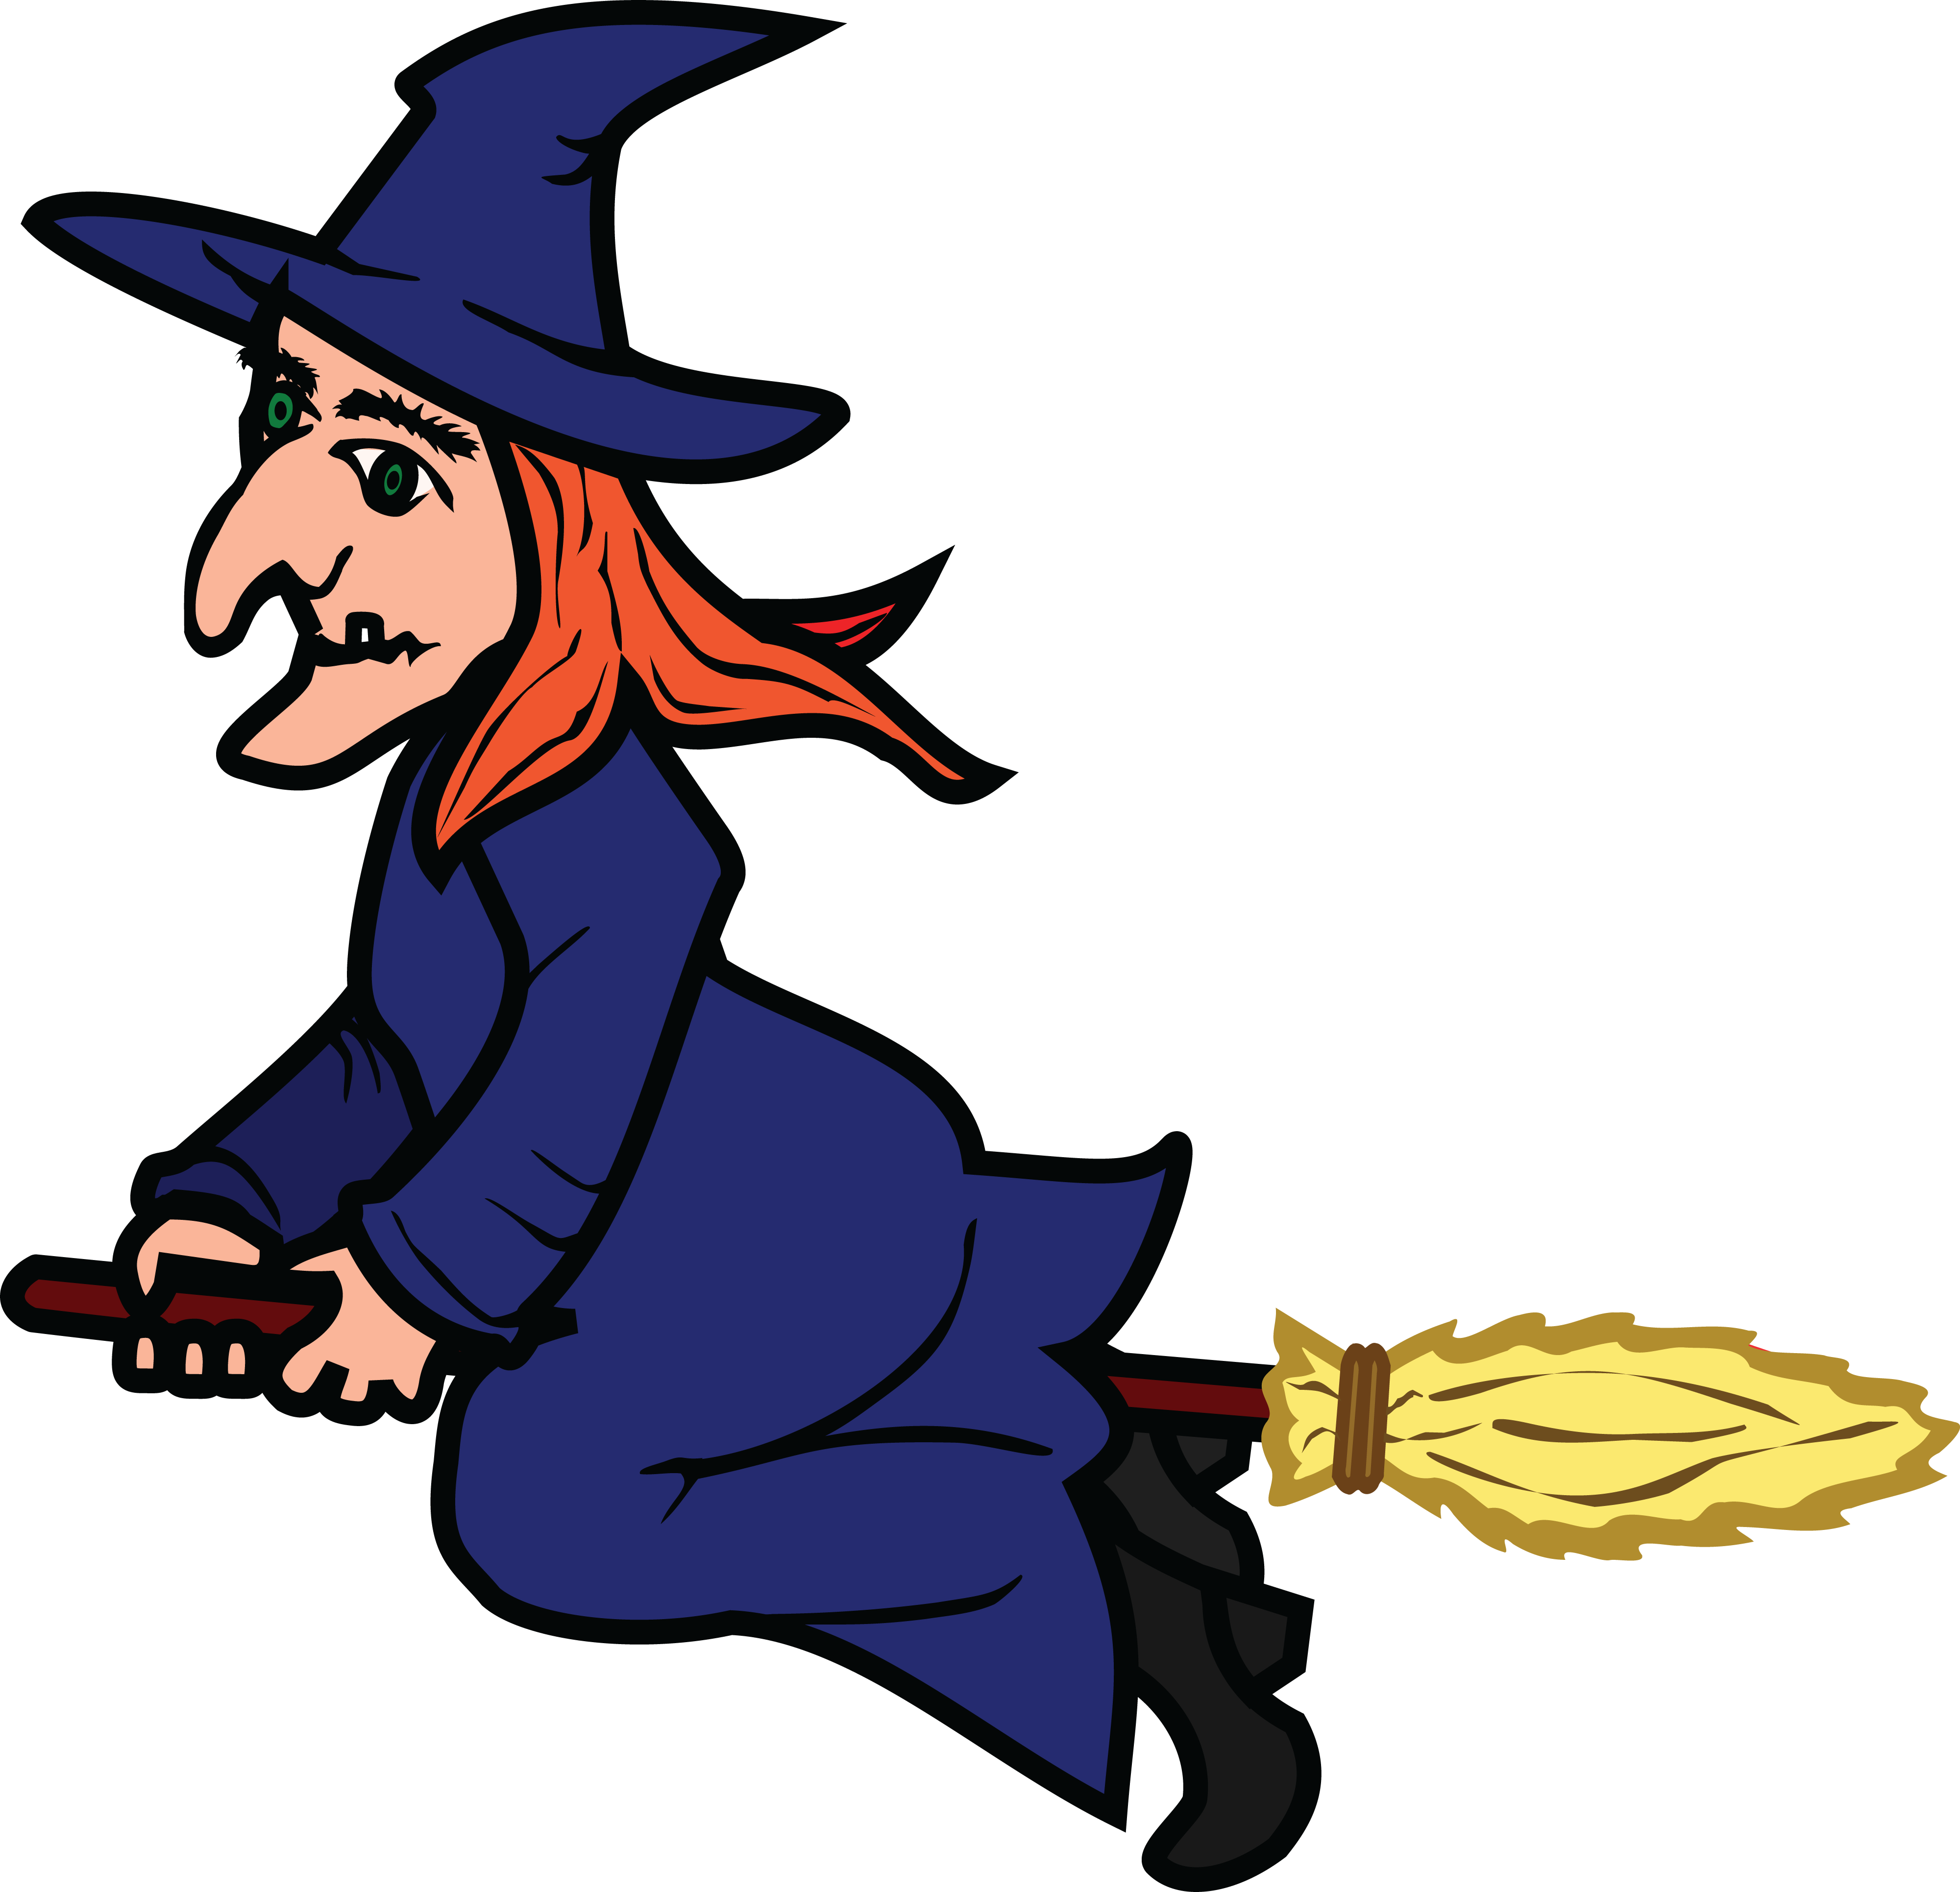 Clip Arts Related To : cartoon witch on a broomstick. 